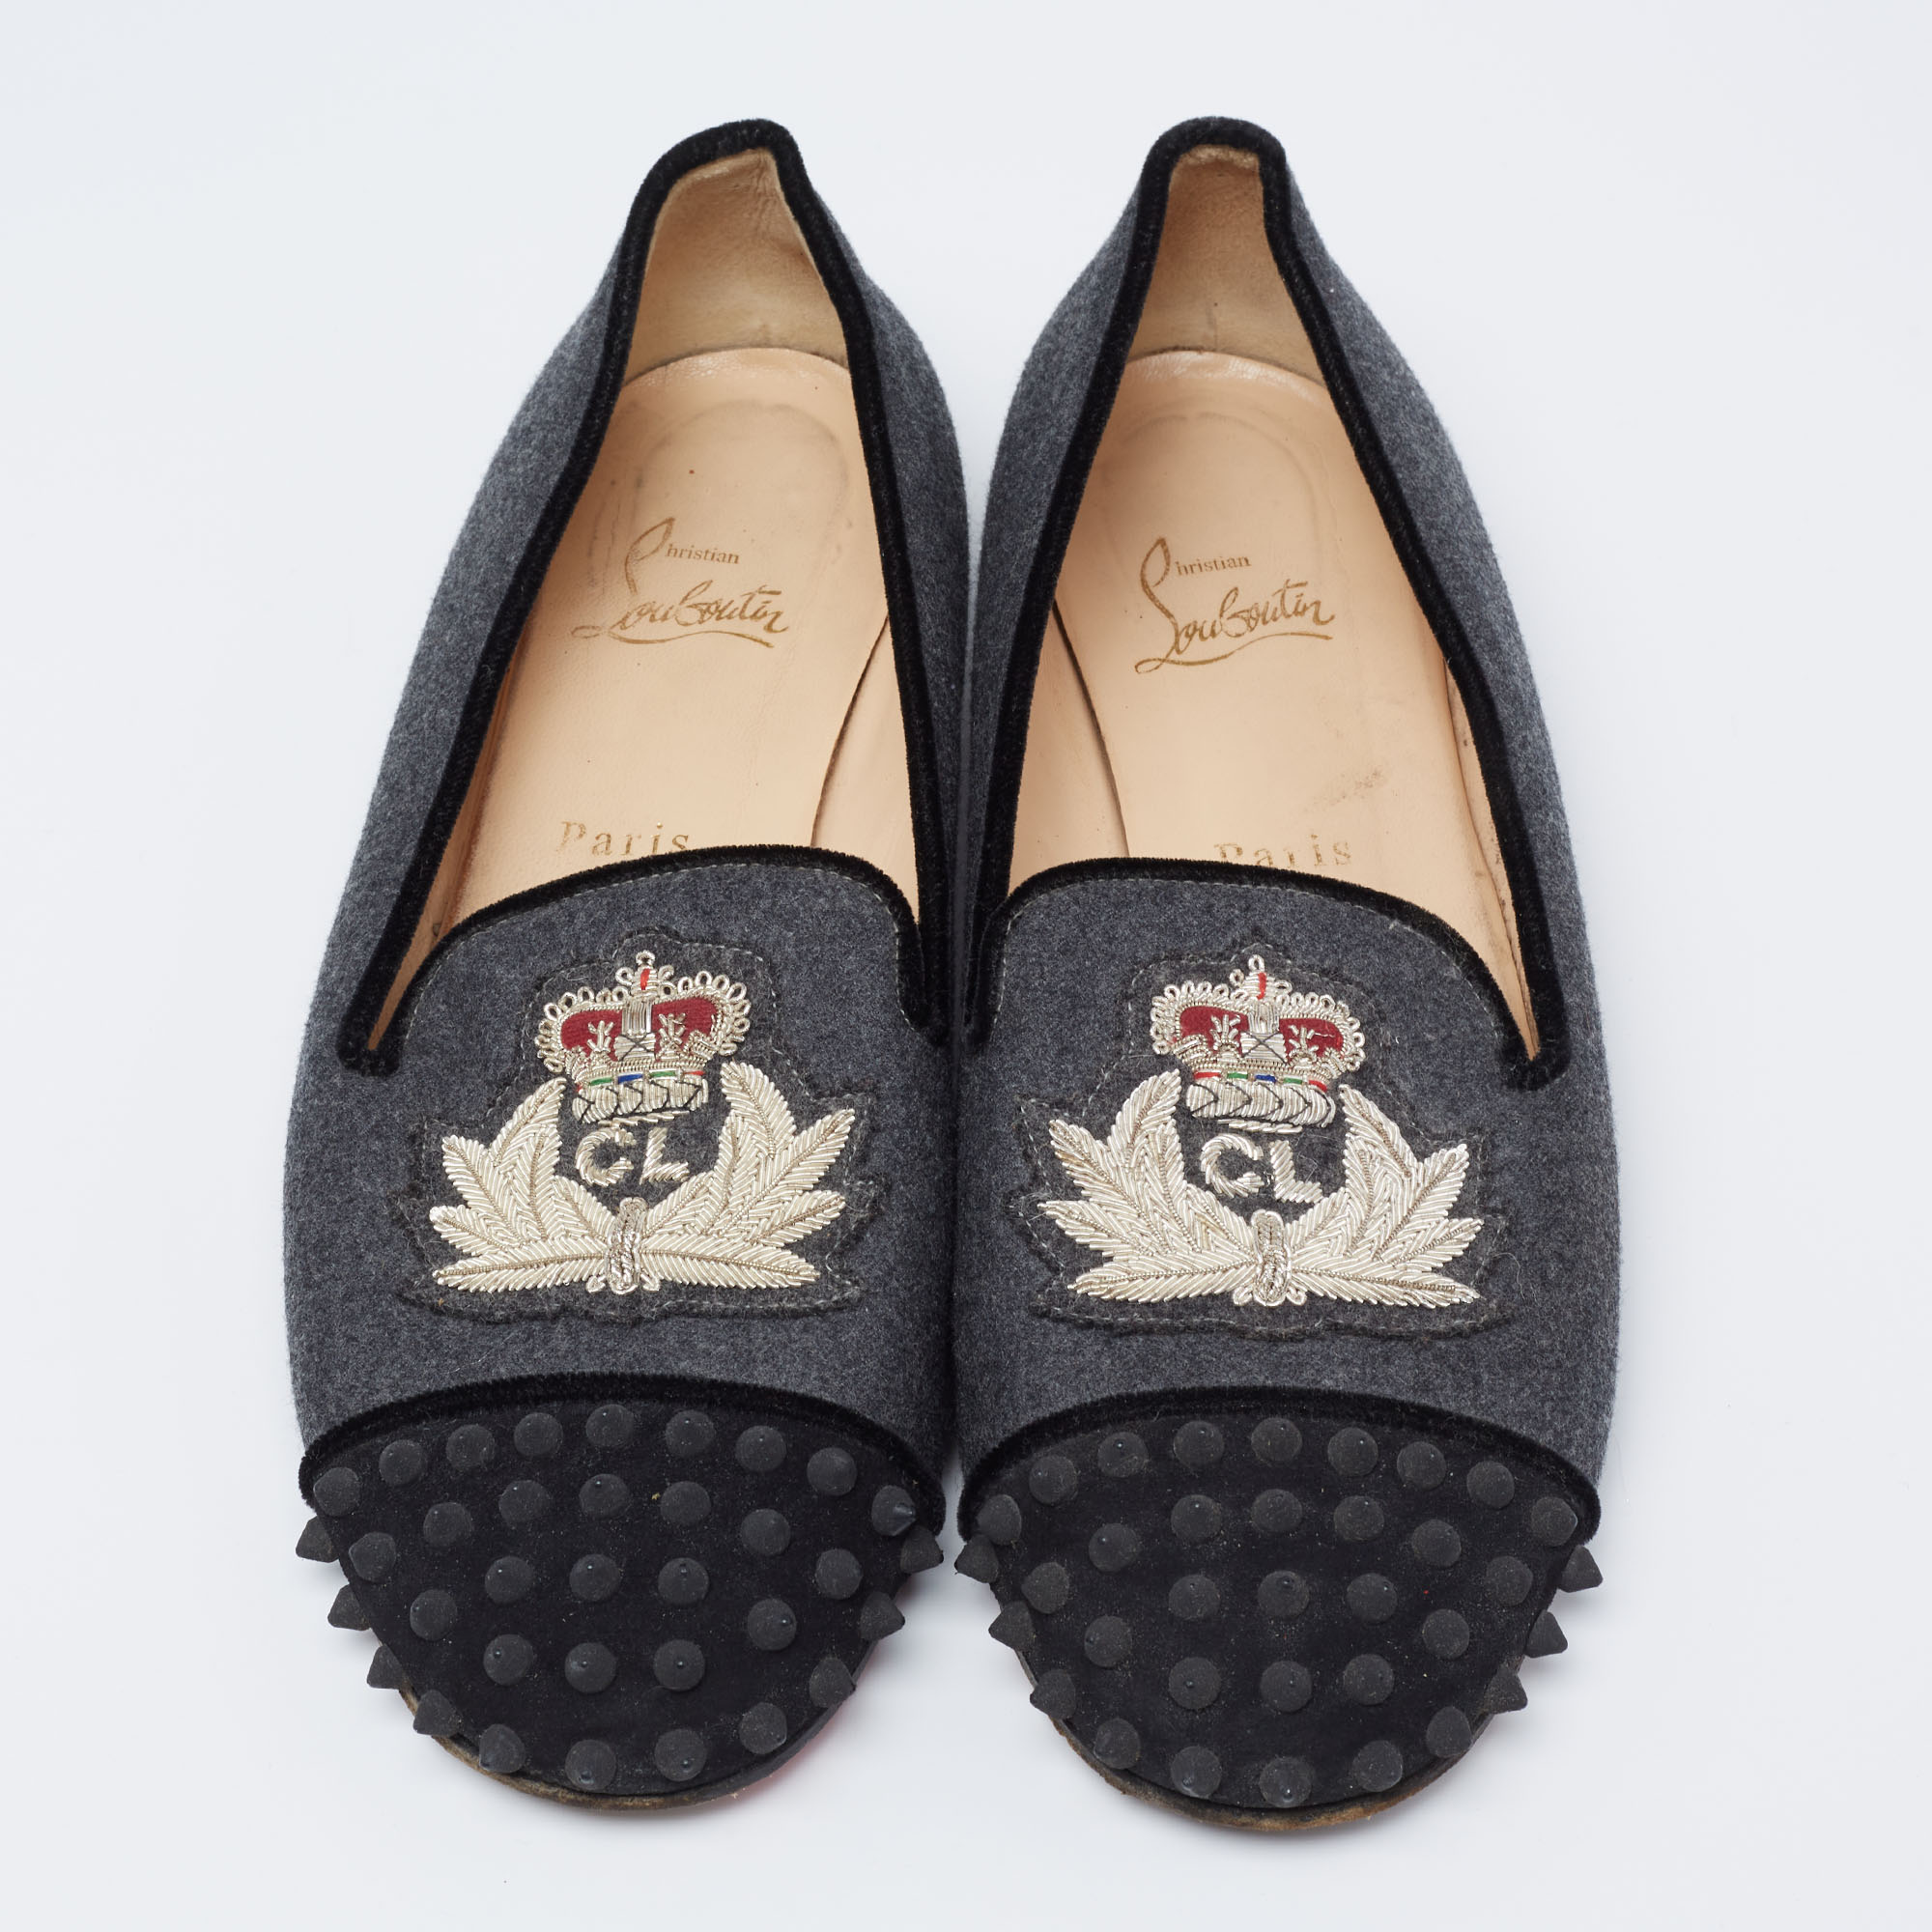 Christian Louboutin Grey/Black Wool And Suede Harvanana Spiked Cap-Toe Smoking Slippers Size 41